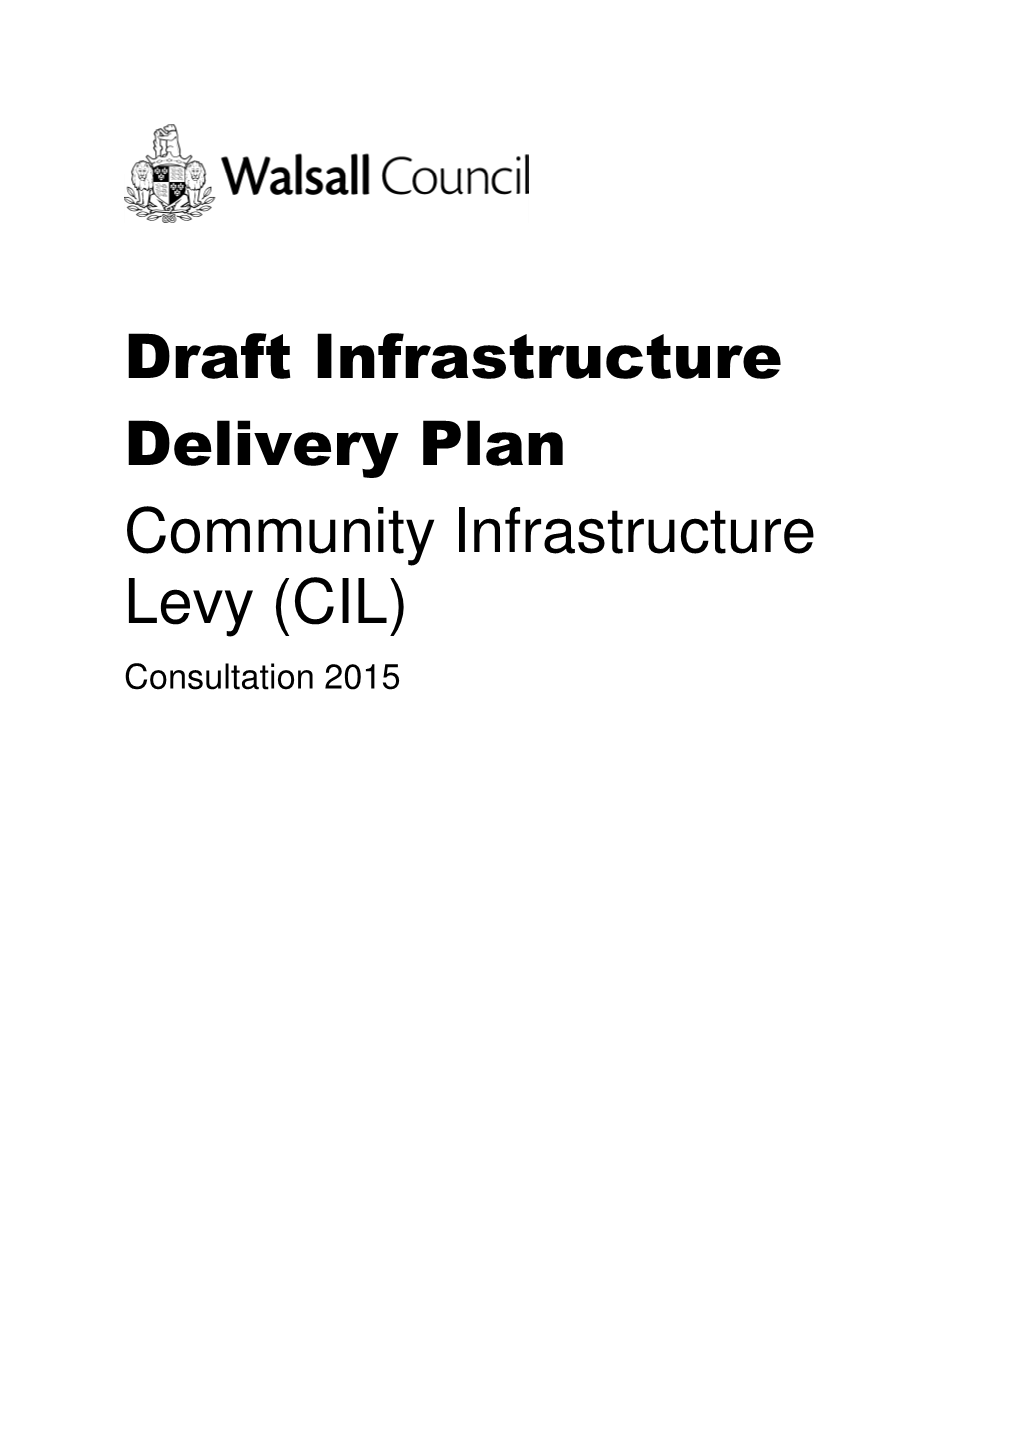 Draft Infrastructure Delivery Plan Community Infrastructure Levy (CIL) Consultation 2015